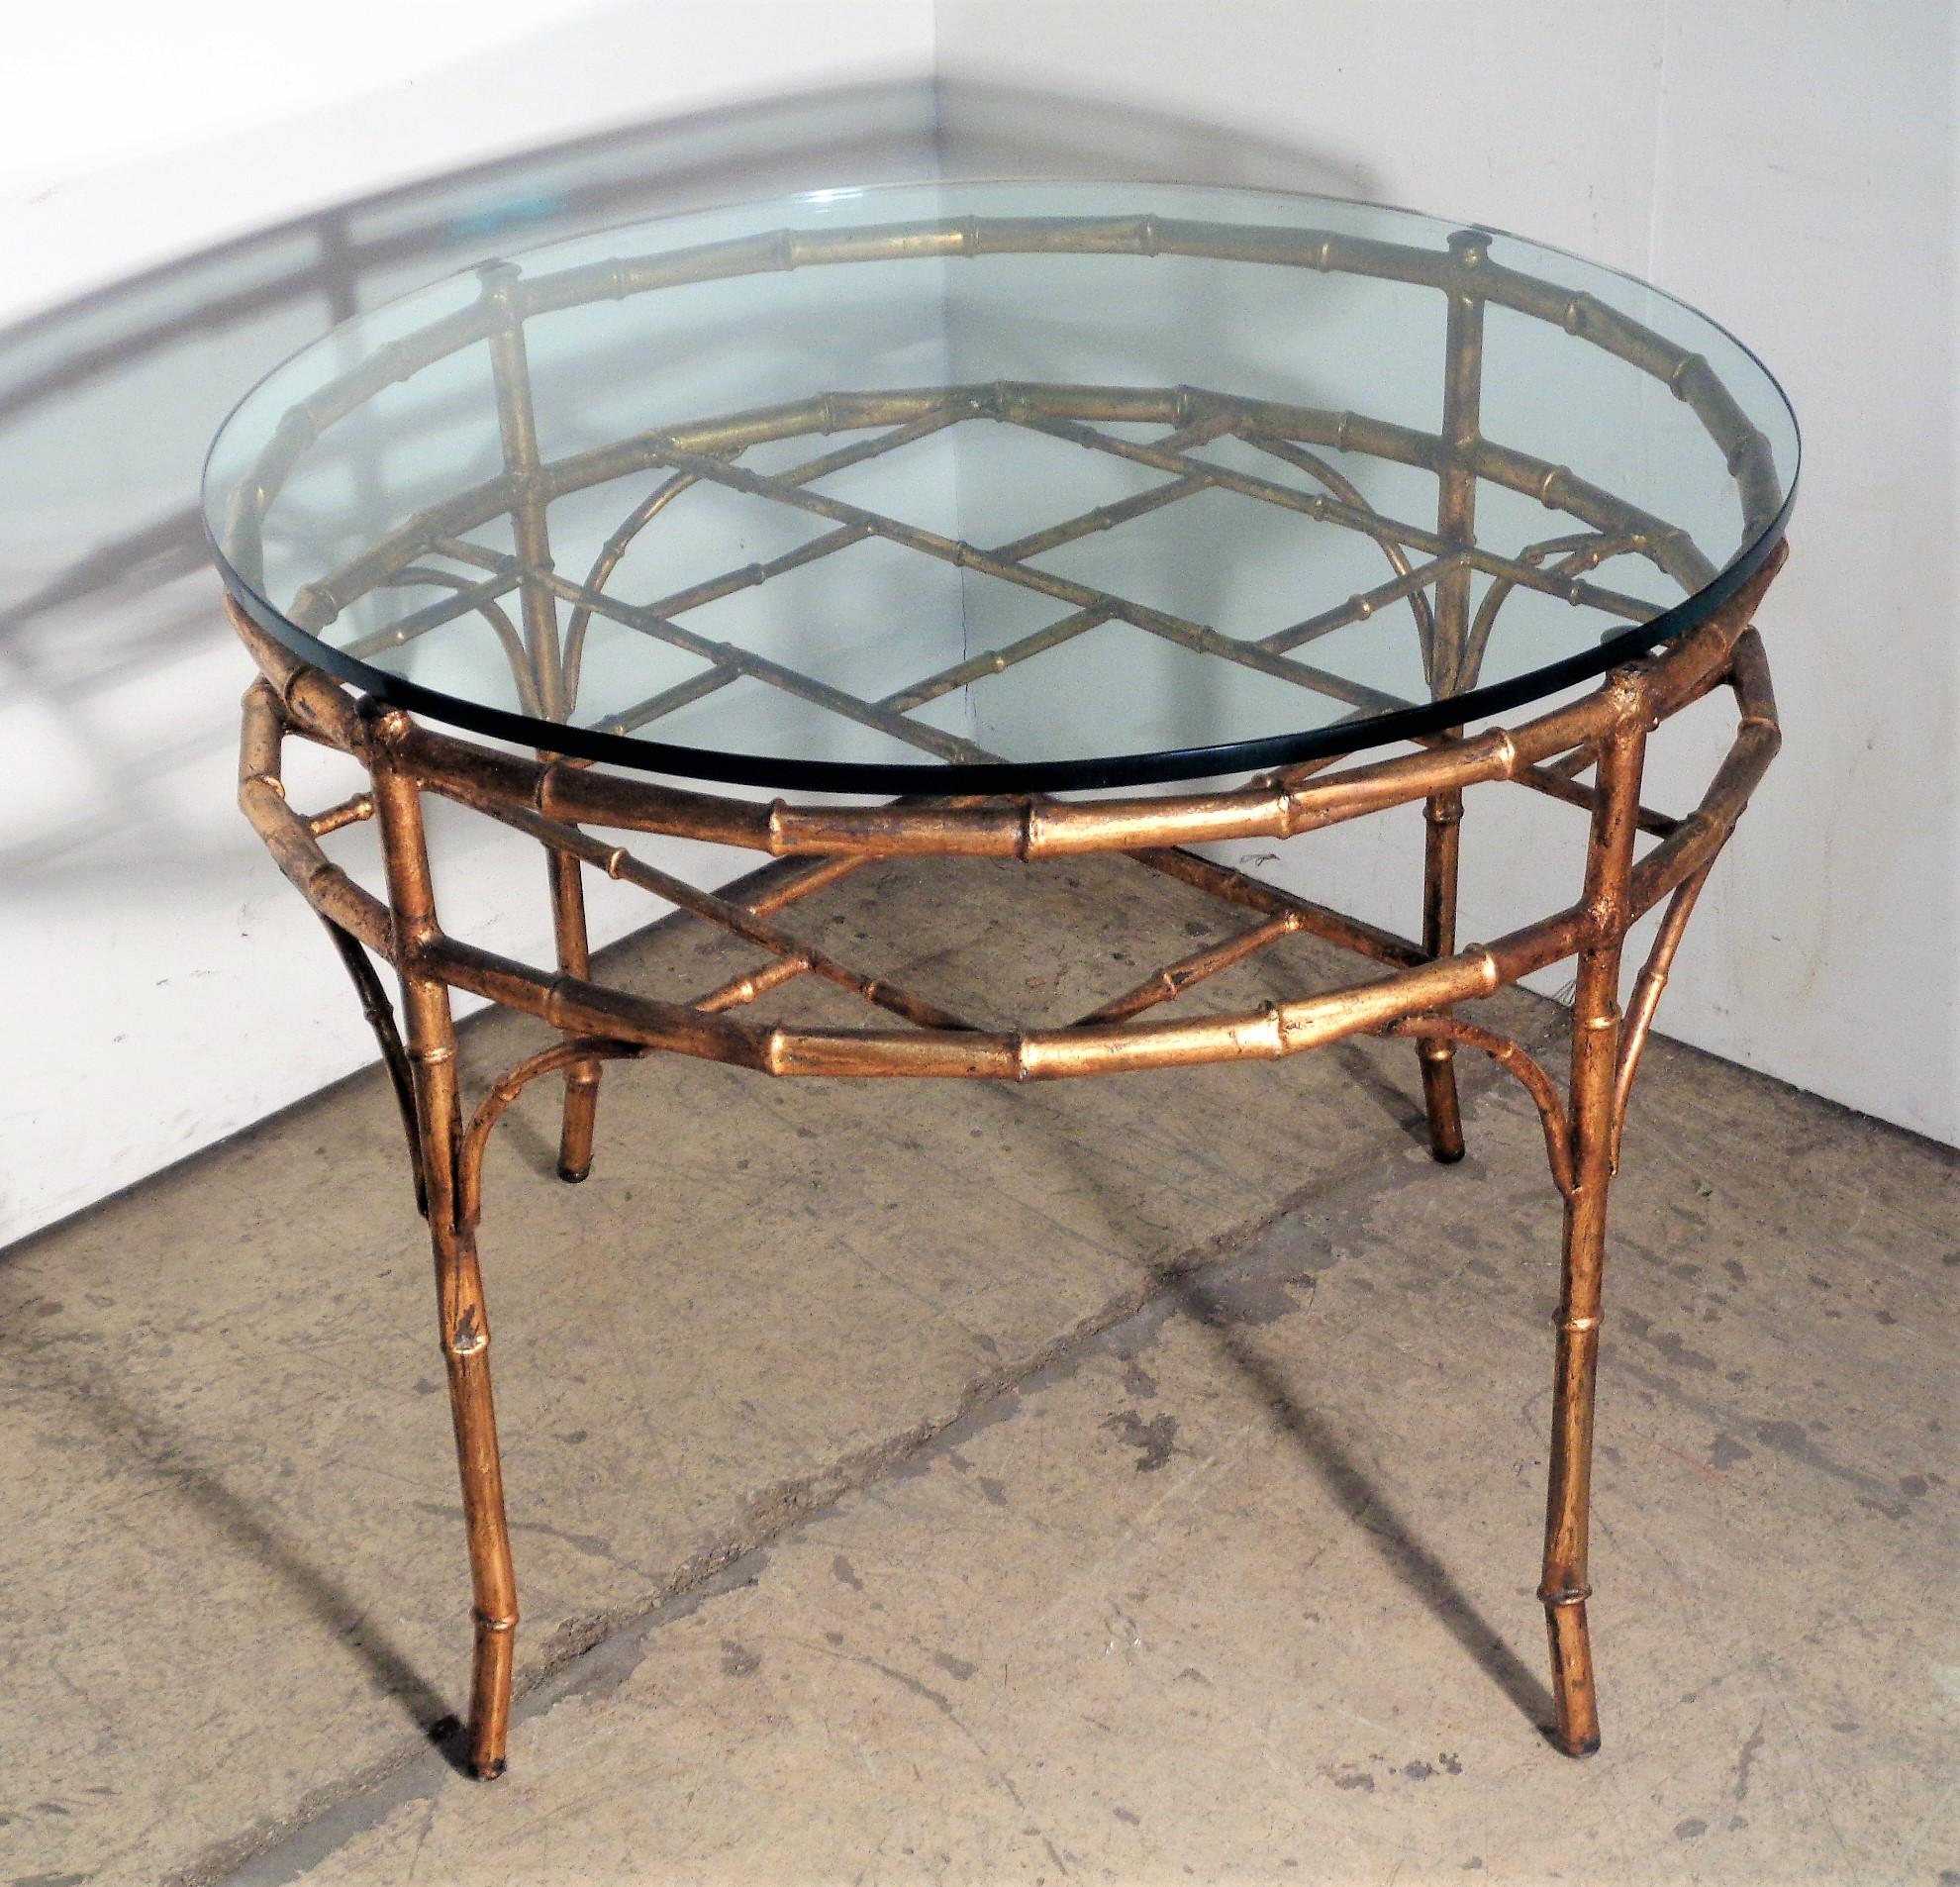 Italian gilt metal faux bamboo table in perfectly aged original gilded surface w/ half inch thick circular beveled plate glass top. Circa 1960. Beautiful. Look at all pictures and read condition report in comment section **** HAND DELIVERY CAN BE